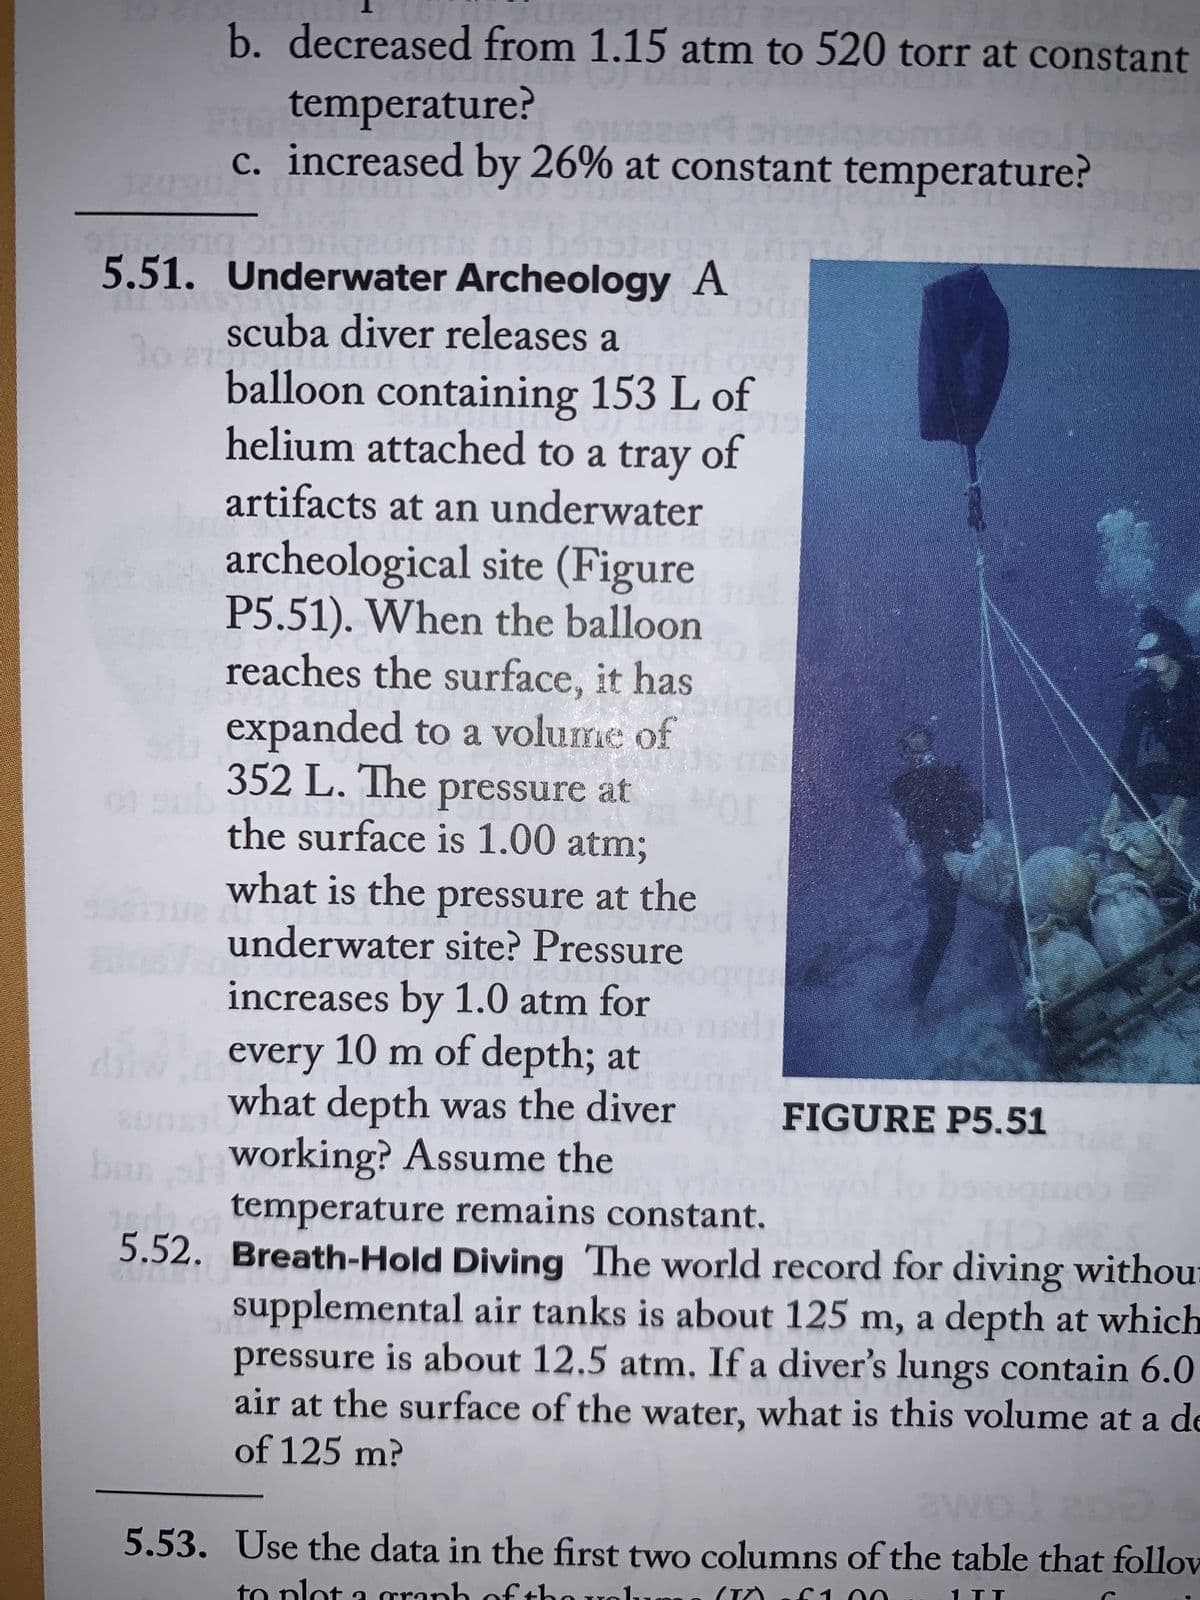 1201911
b. decreased from 1.15 atm to 520 torr at constant
temperature?
c. increased by 26% at constant temperature?
10011010
18 D515)
5.51. Underwater Archeology A
19
scuba diver releases a
30 27 any
balloon containing 153 L of
helium attached to a tray of
artifacts at an underwater
un ayt
2019
P
201
archeological site (Figure
P5.51). When the balloon
su
reaches the surface, it has
expanded to a volume of
352 L. The pressure at
Baggi
the surface is 1.00 atm;
what is the pressure at the
underwater site? Pressure
Toyong tim
increases by 1.0 atm for
every 10 m of depth; at
what depth was the diver
banal working? Assume the
19
er of temperature remains constant.
5.52. Breath-Hold Diving The world record for diving withou:
supplemental air tanks is about 125 m, a depth at which
pressure is about 12.5 atm. If a diver's lungs contain 6.0
air at the surface of the water, what is this volume at a de
of 125 m?
de
Or
(
FIGURE P5.51
awod 200
5.53. Use the data in the first two columns of the table that follow